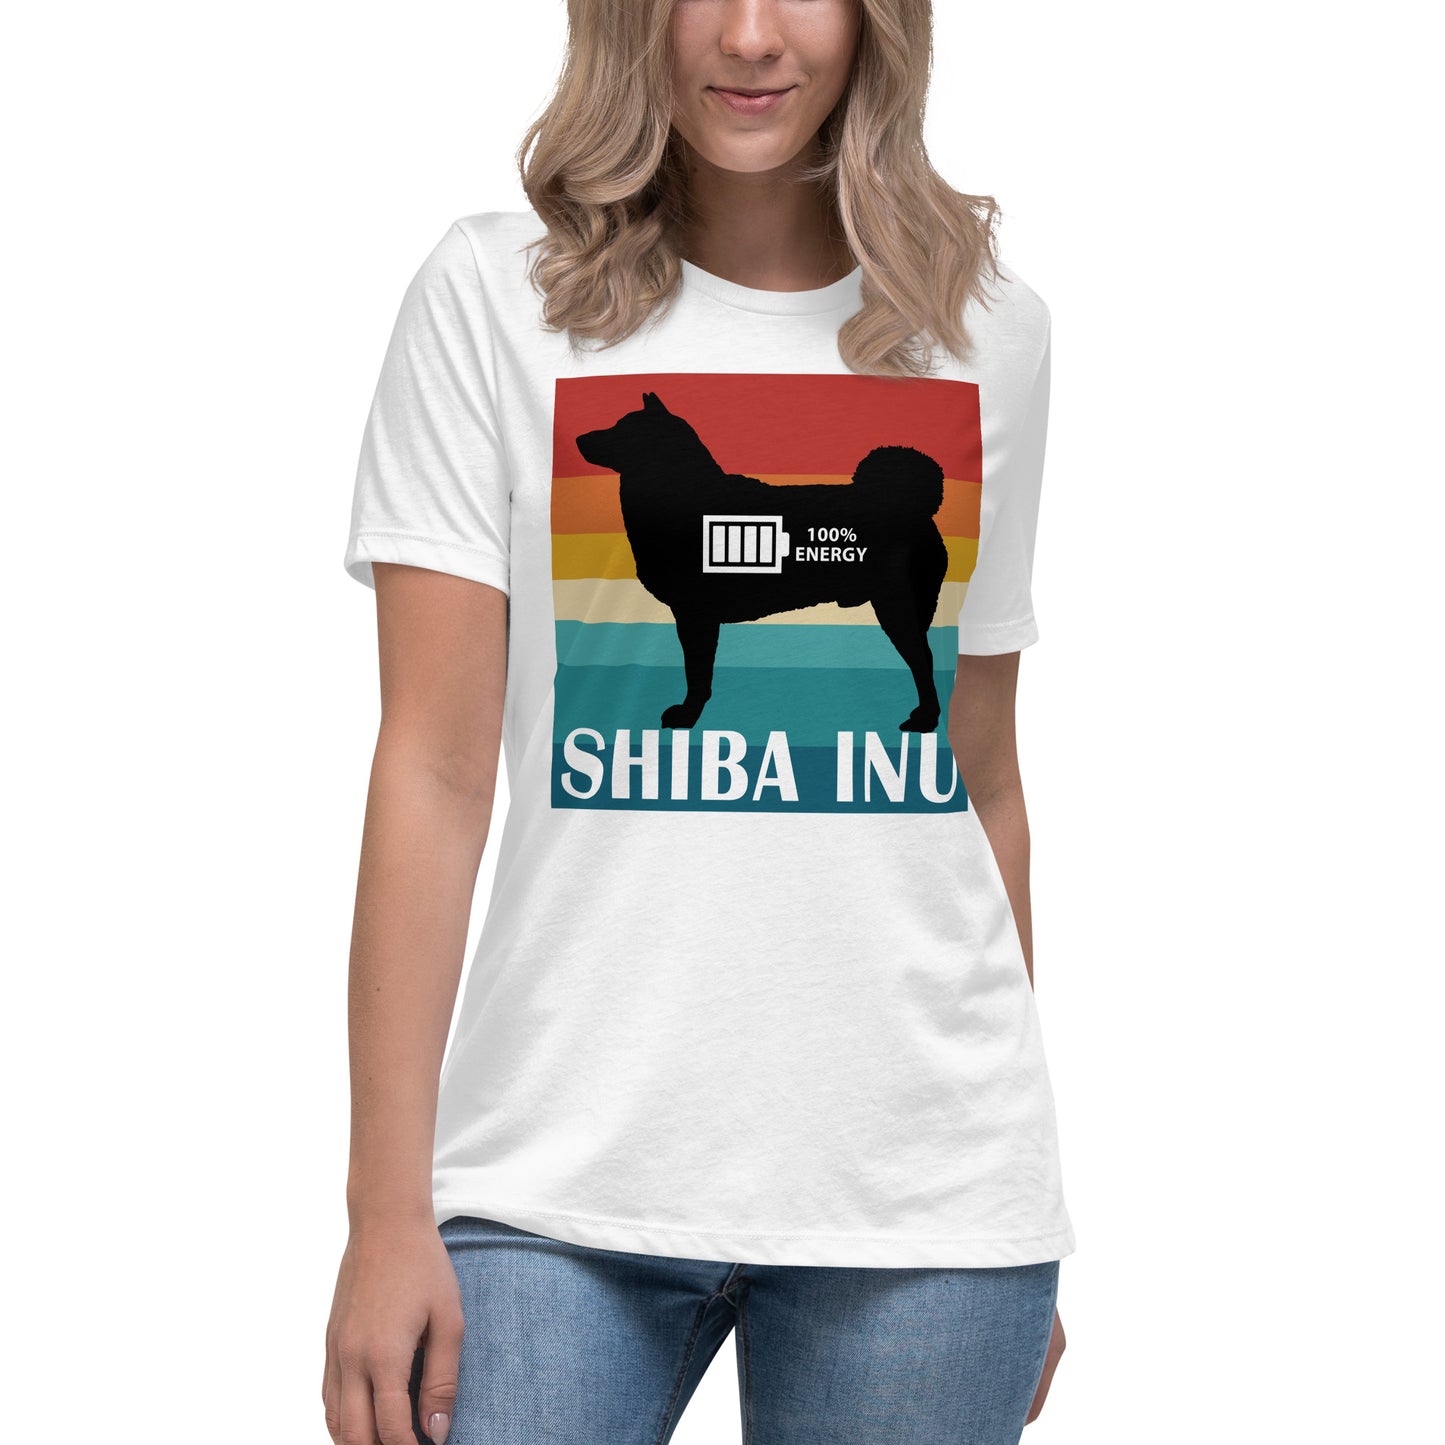 Shiba Inu 100% Energy Women's Relaxed T-Shirt by Dog Artistry